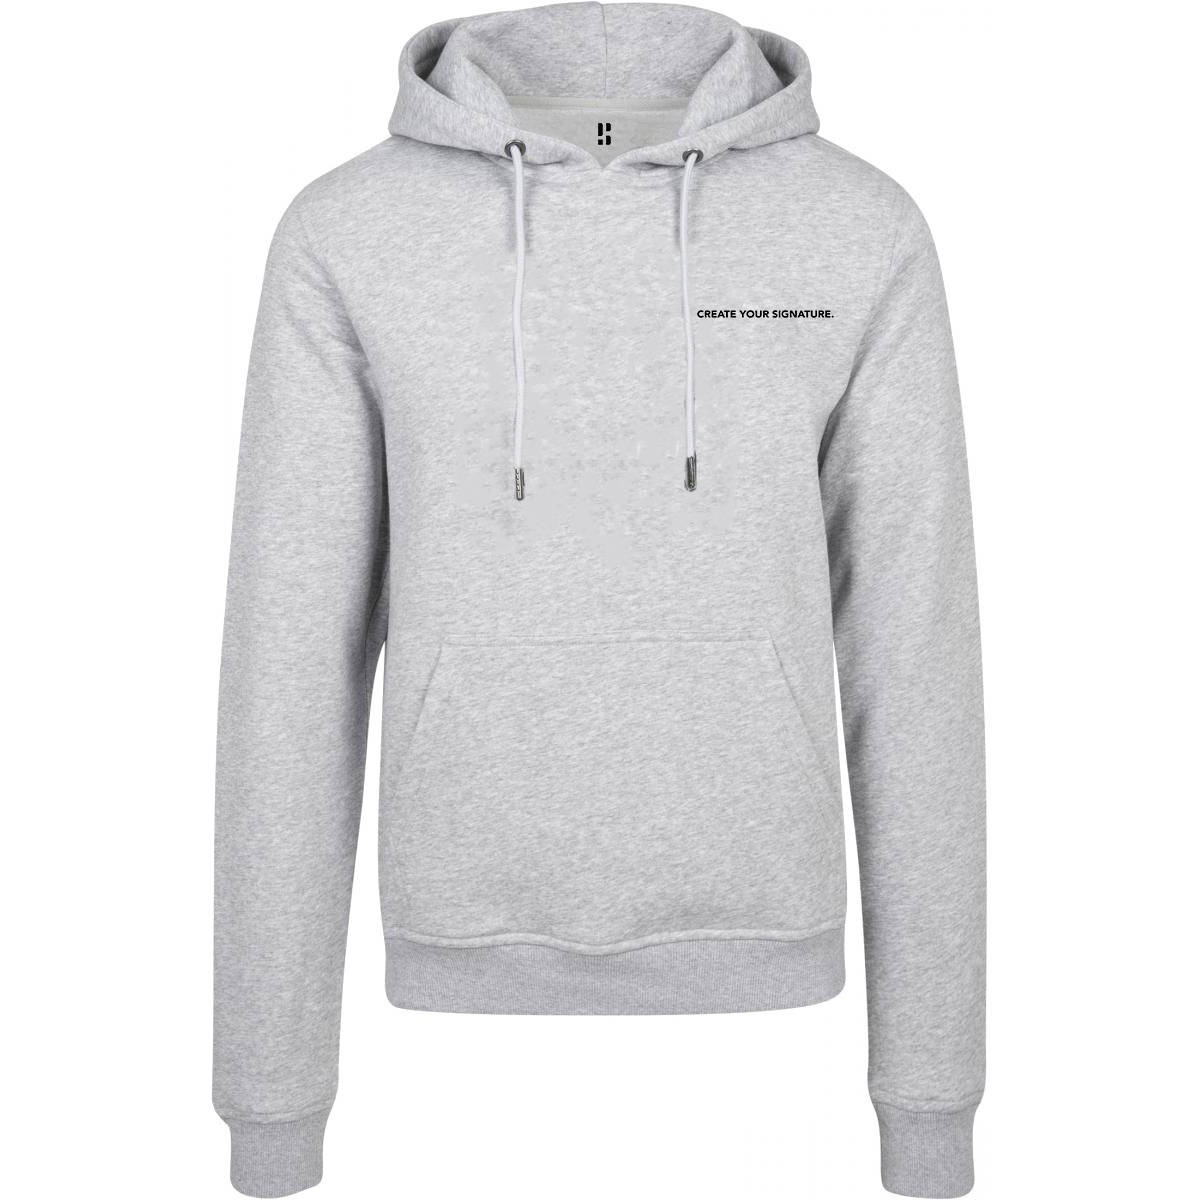 Create Your Signature Hoodie - Gray